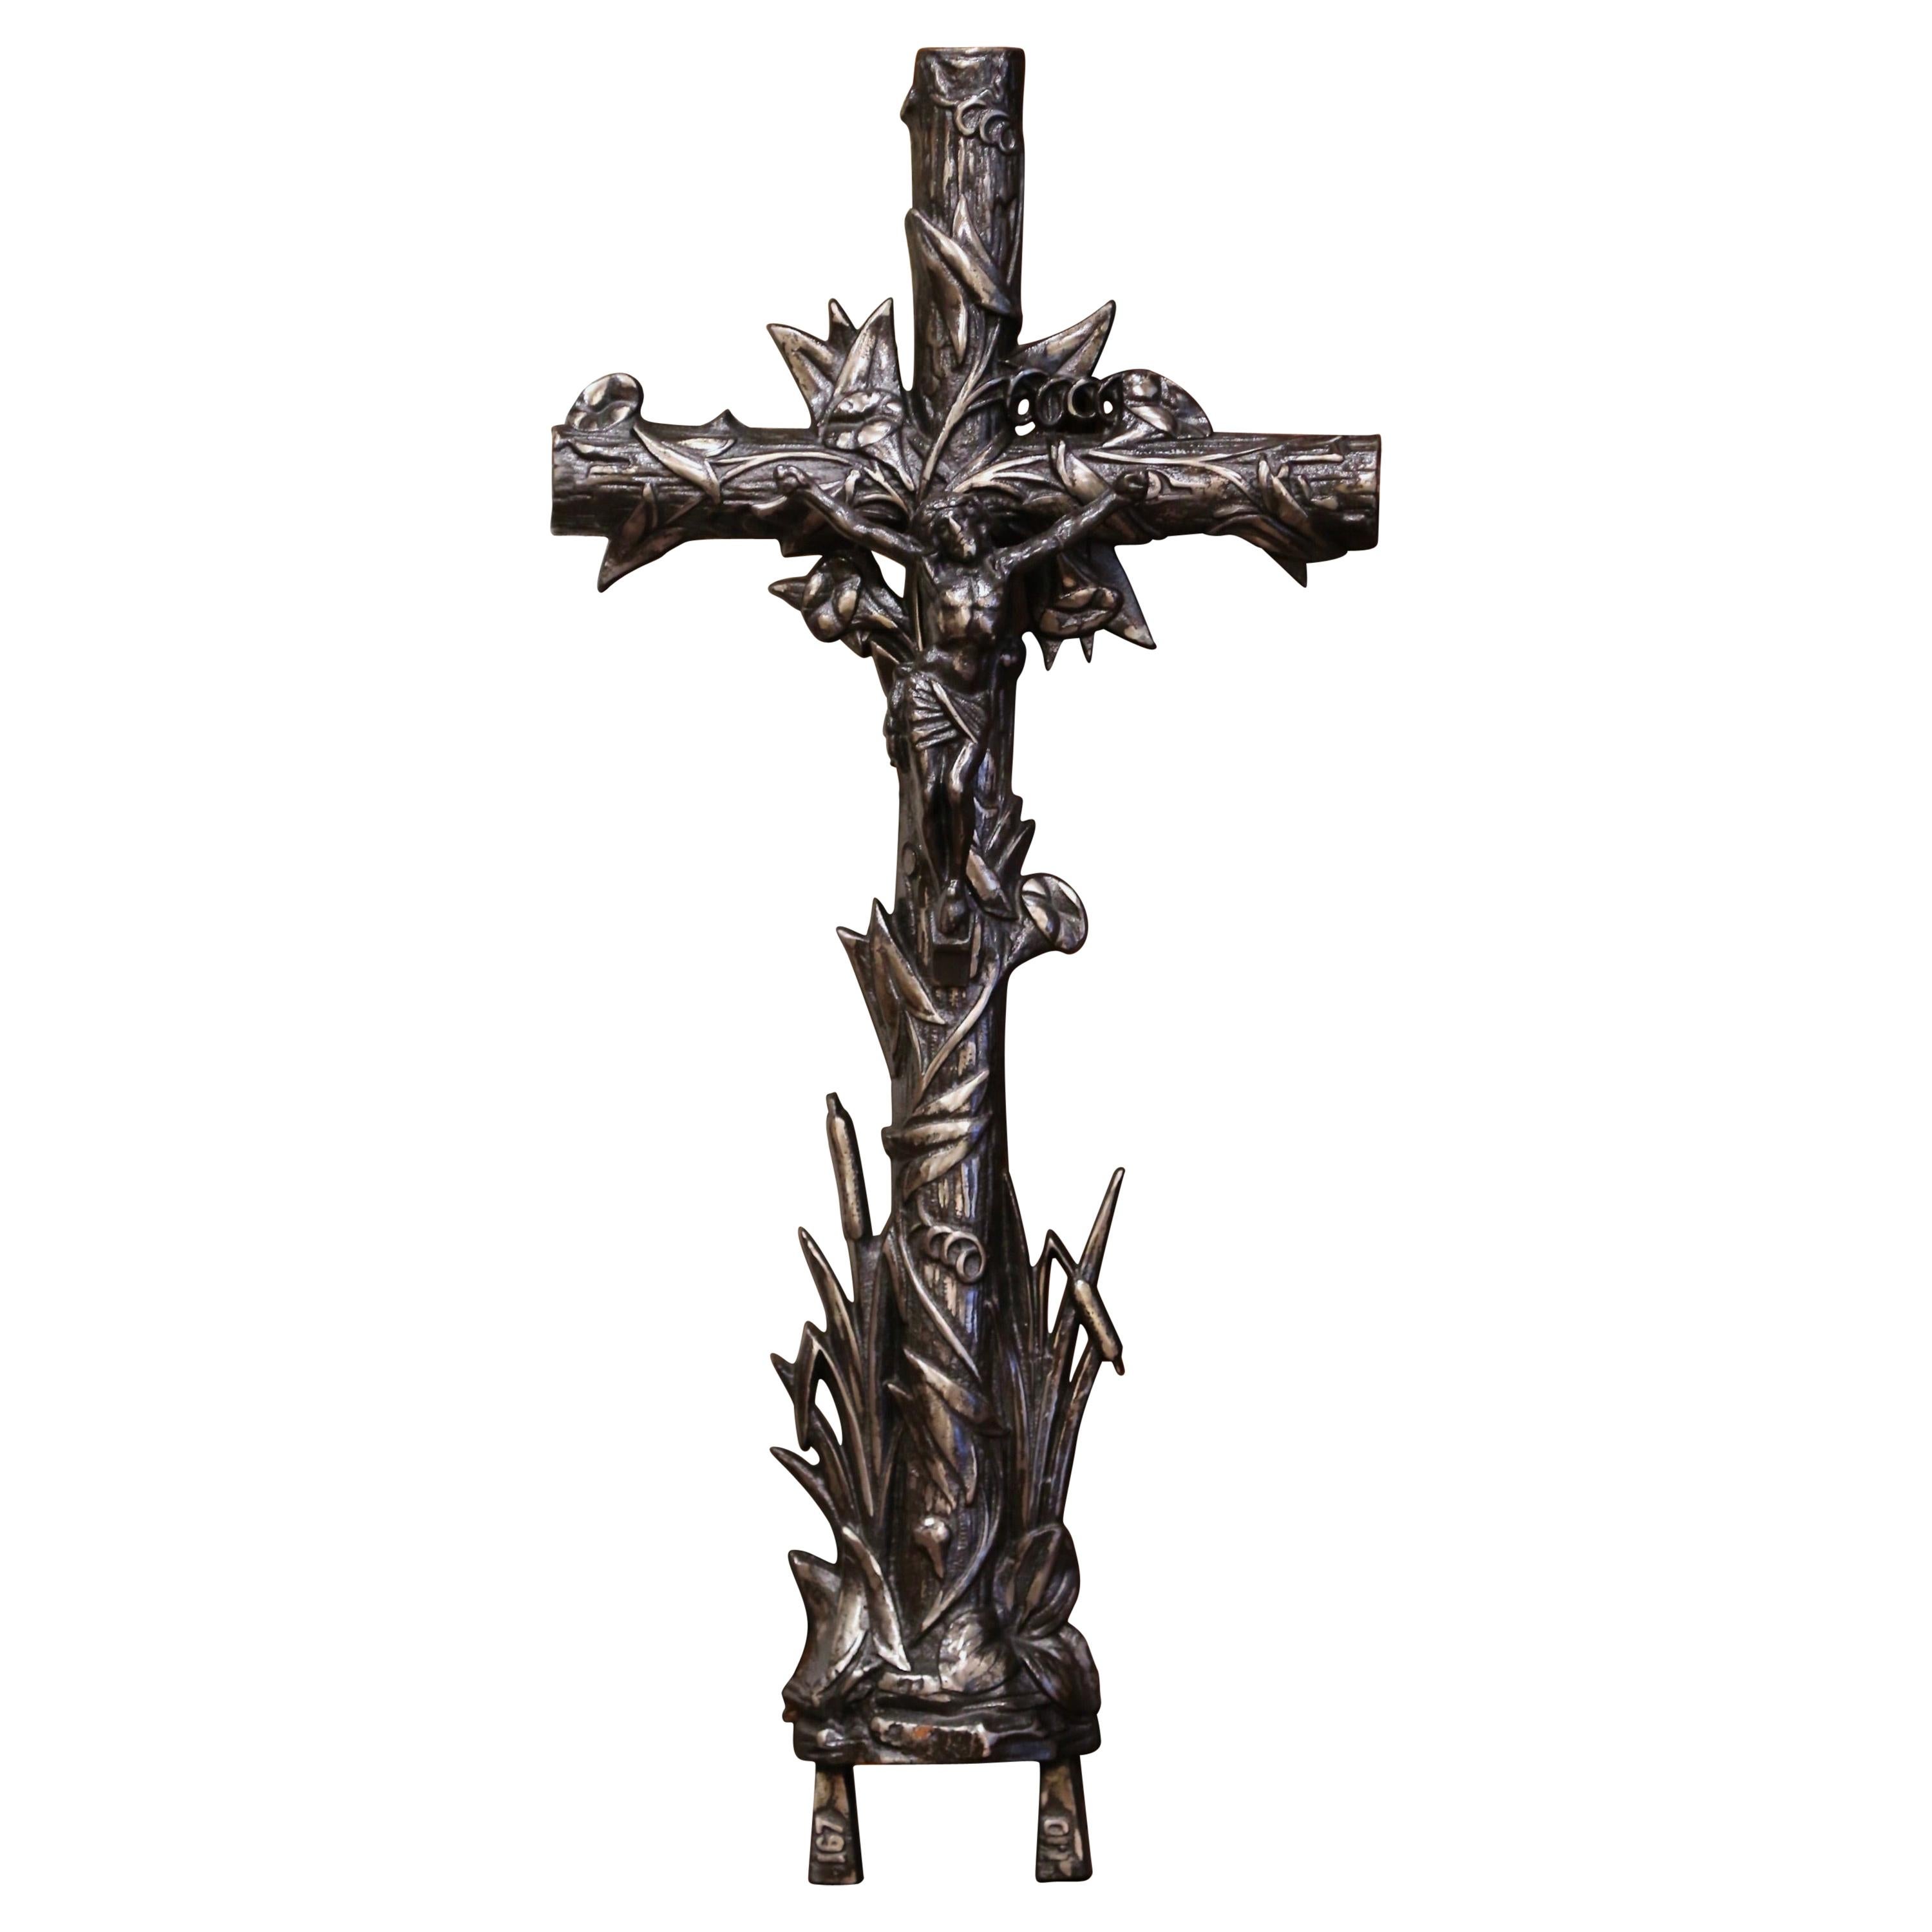 Mid-19th Century French Polished Iron Garden Crucifix Cross with Floral Motifs